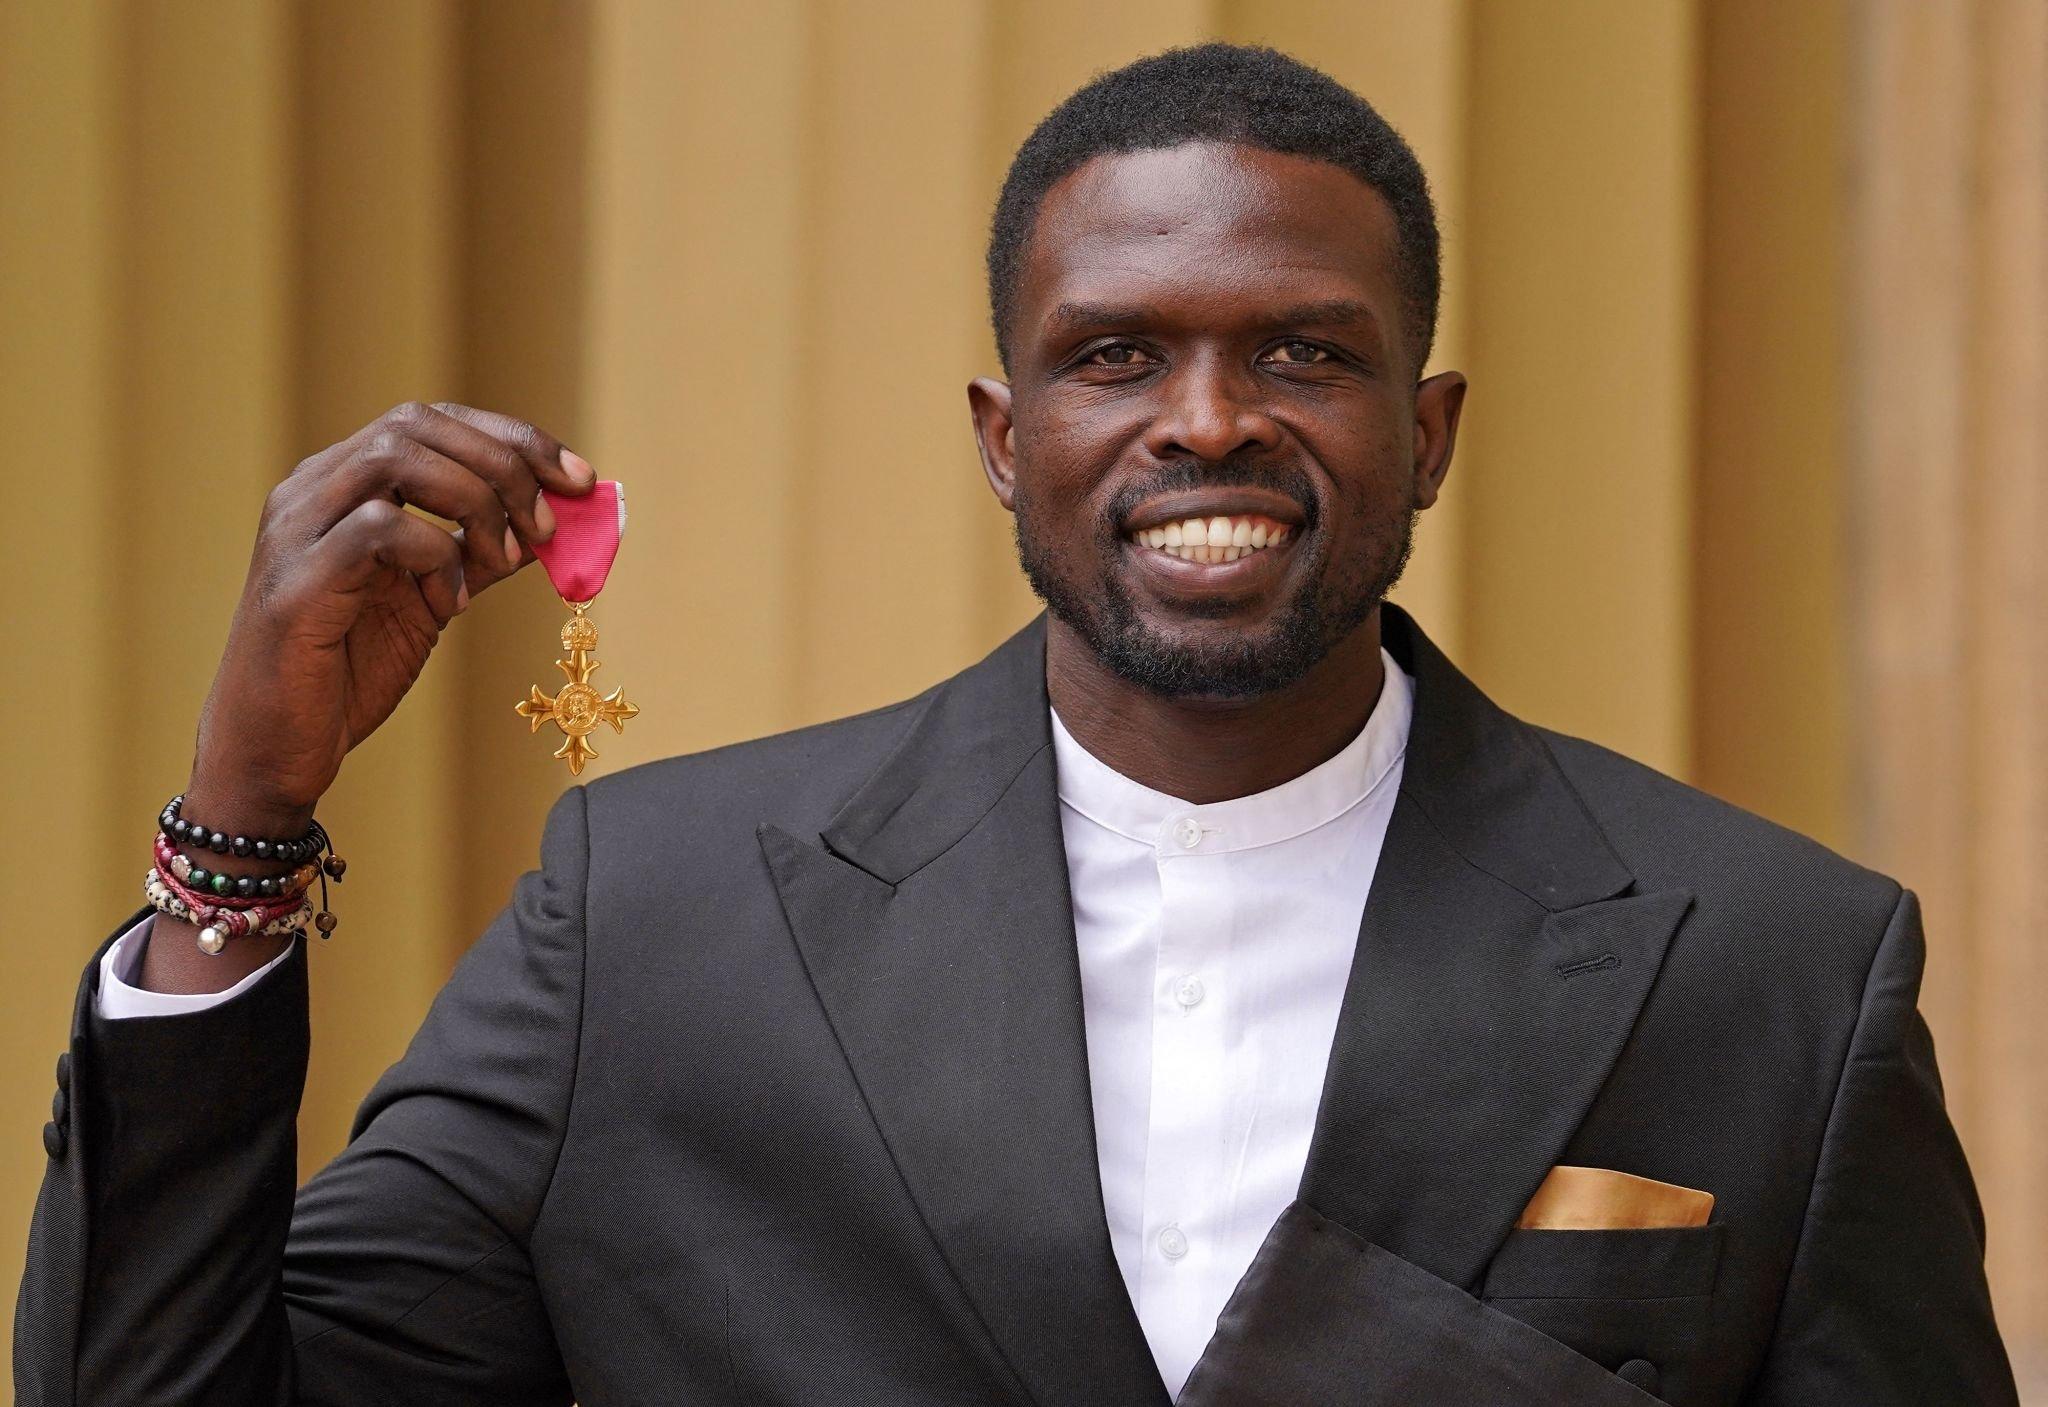 South Sudanese-British former professional basketball player Luol Deng poses with his medal after being appointed an Officer of the Order of the British Empire (OBE), at an investiture ceremony at Buckingham Palace in London on July 7, 2022. (Photo by Gareth Fuller / POOL / AFP) (Photo by GARETH FULLER/POOL/AFP via Getty Images)